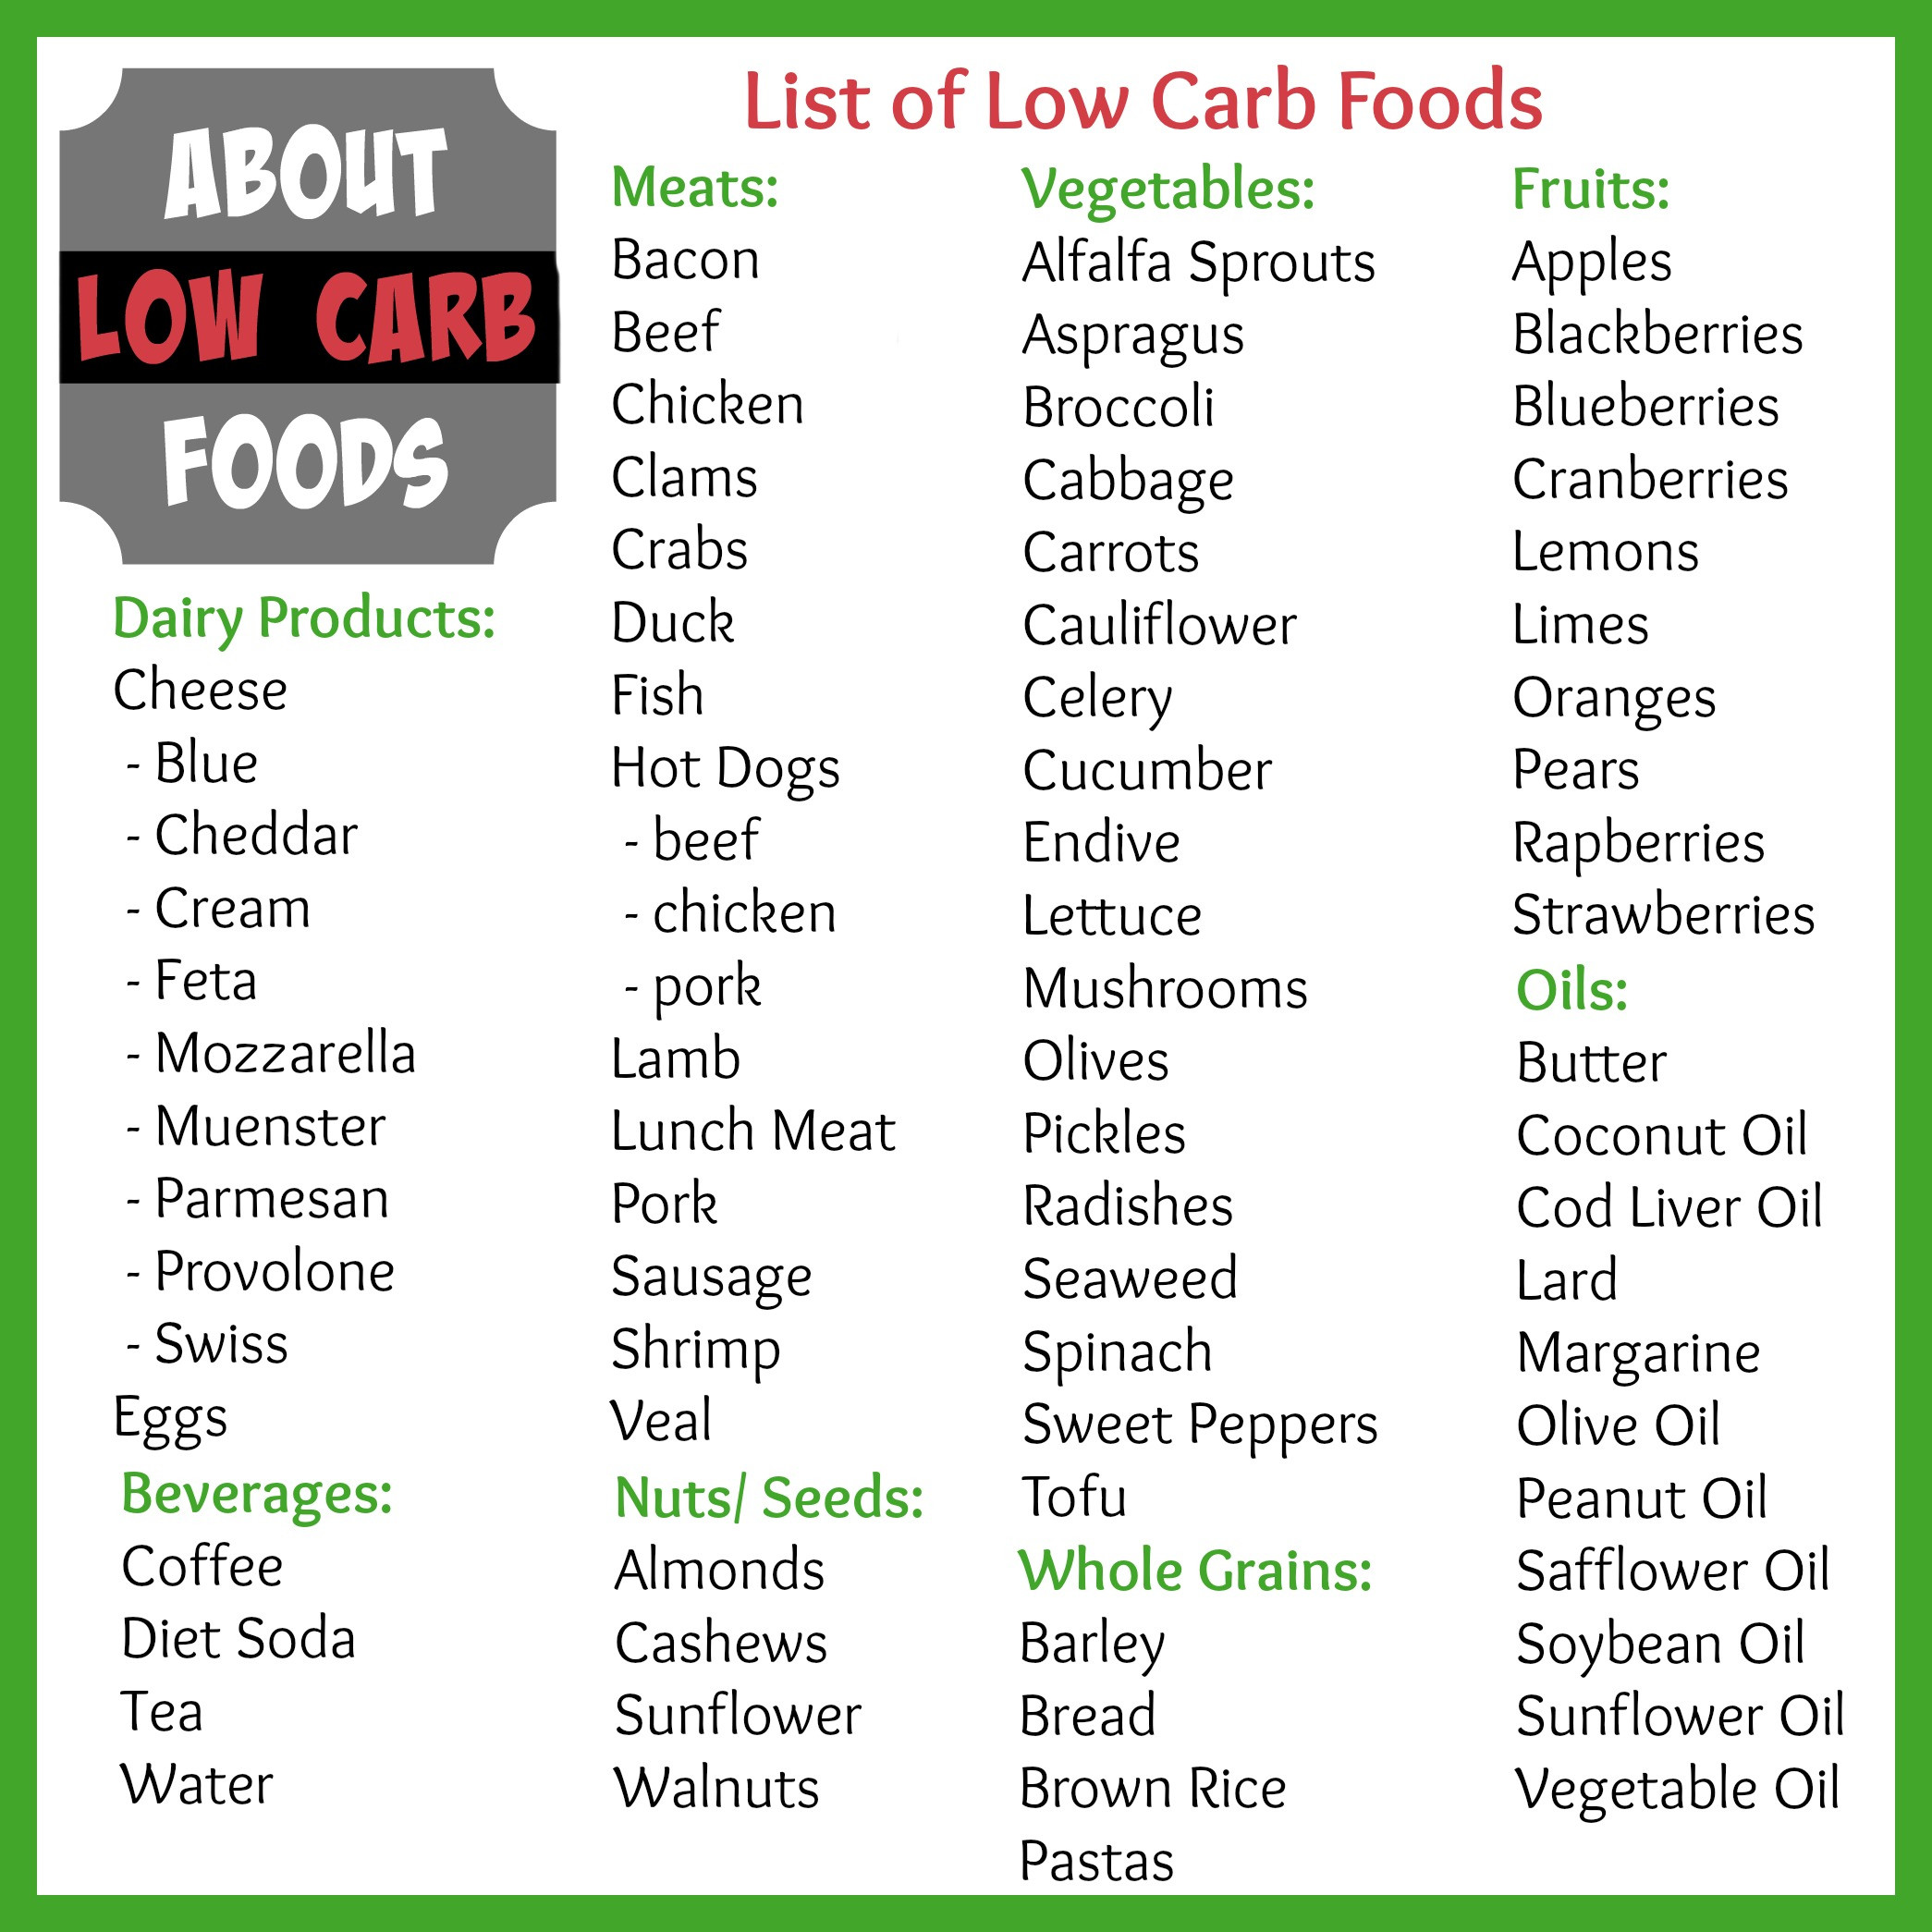 Low Carbohydrate Diet Food Lists
 List of Low Carb Foods About Low Carb Foods